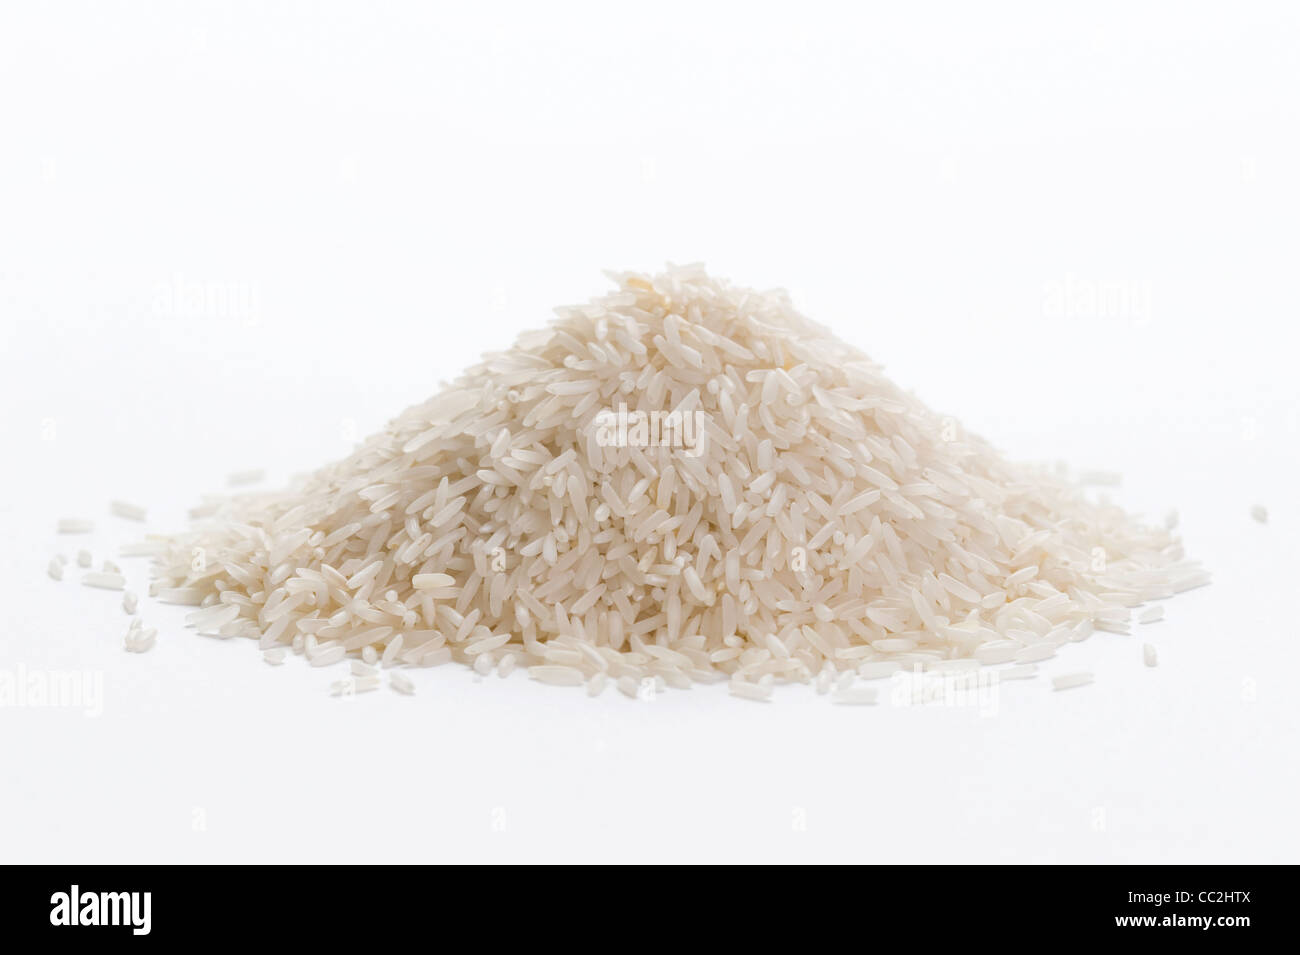 uncooked basmati rice in a small pile on a white background Stock Photo